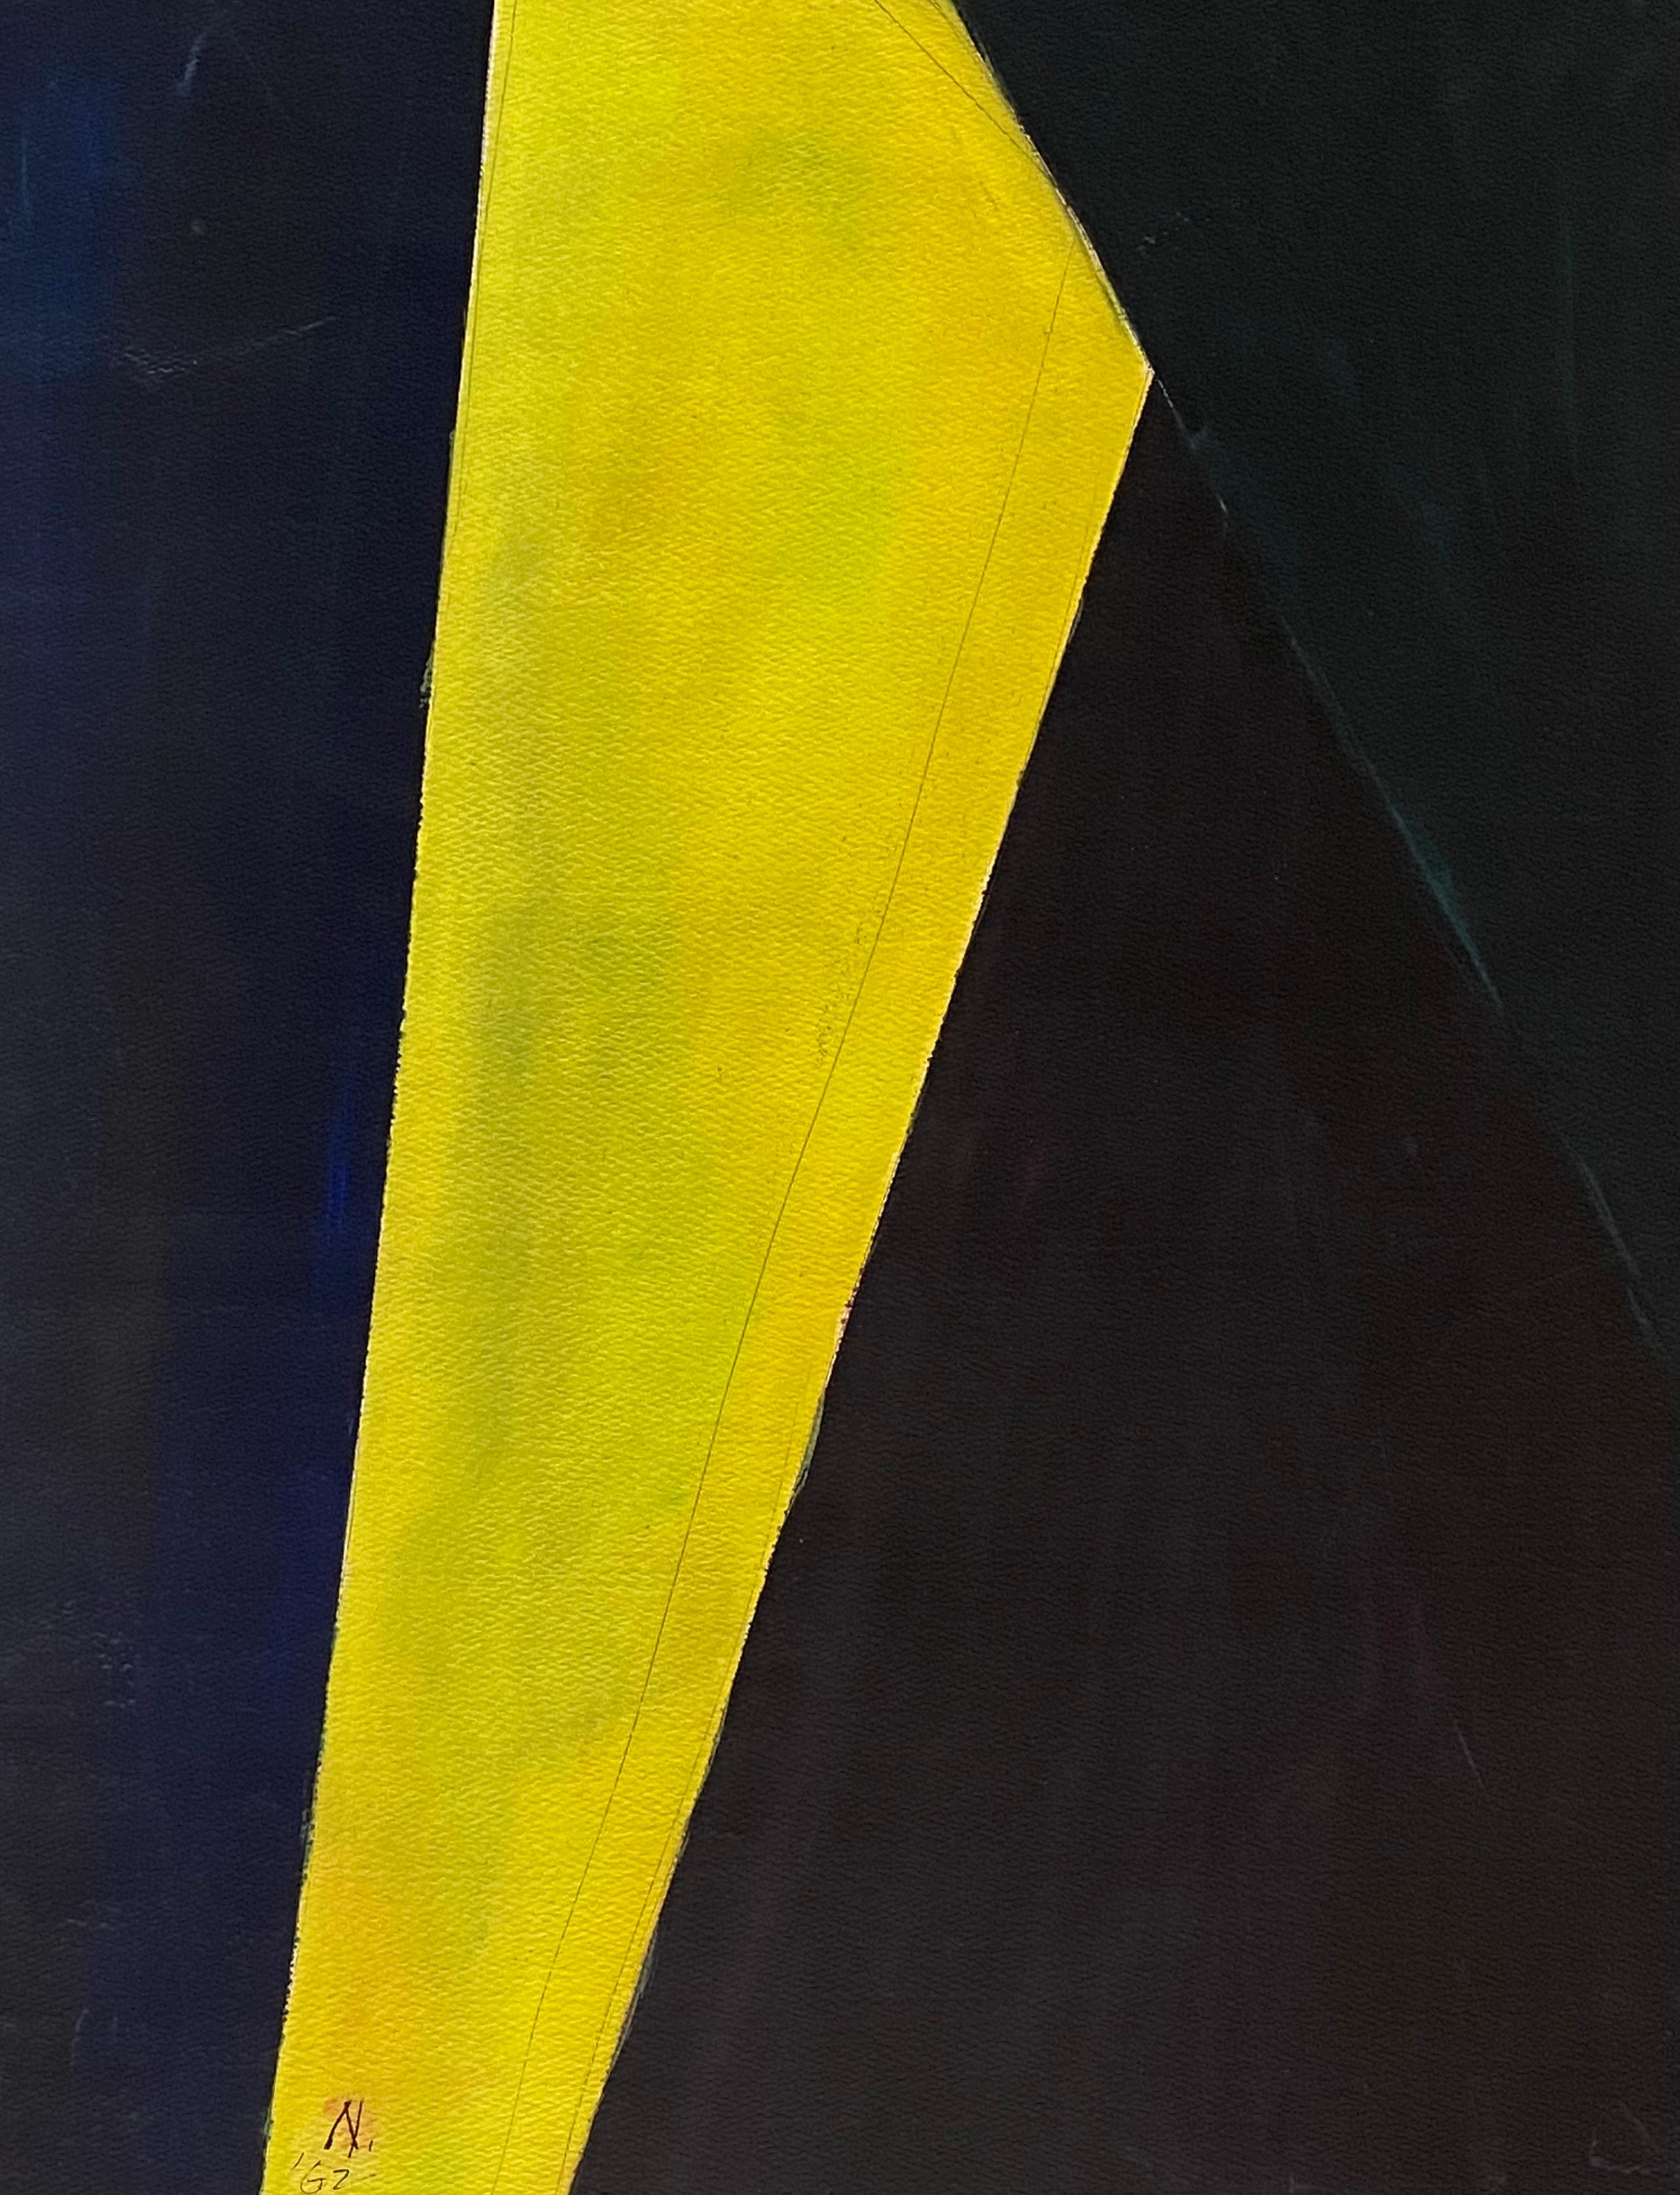 “Abstract in Black and Yellow” - Post-Modern Art by Lloyd Raymond Ney